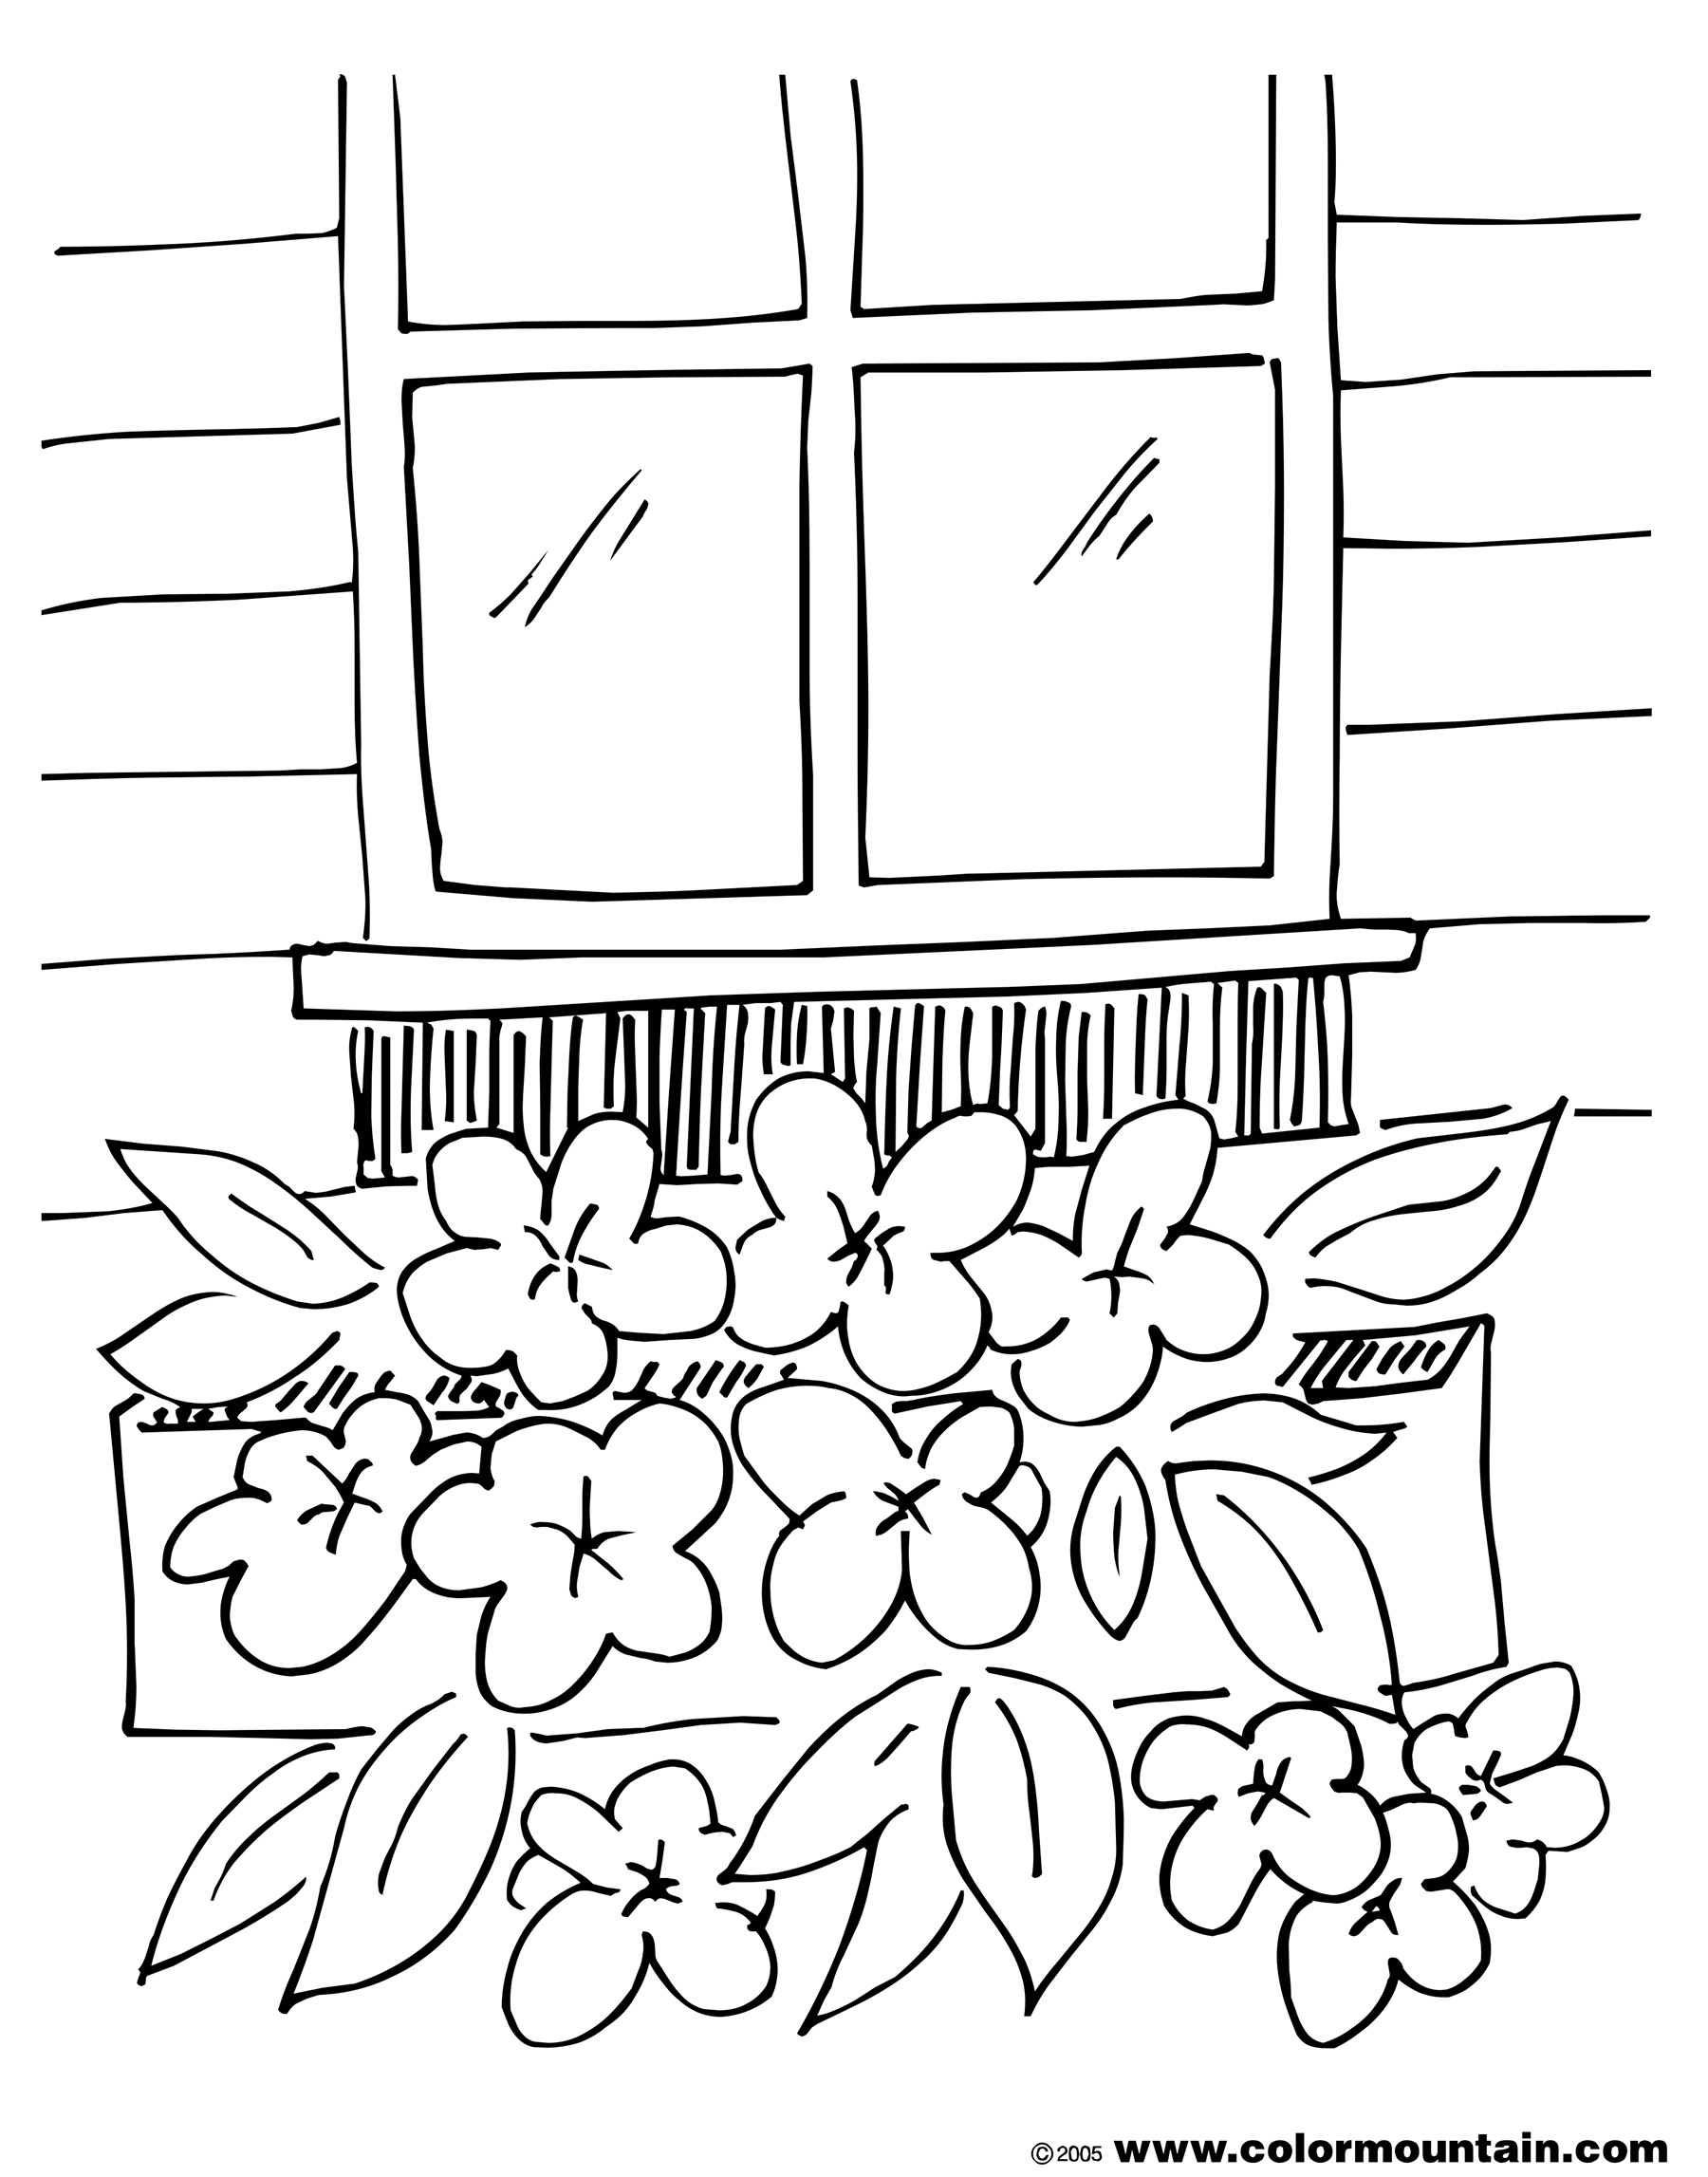 Box Flower Coloring Sheete - Create A Printout Or Activity